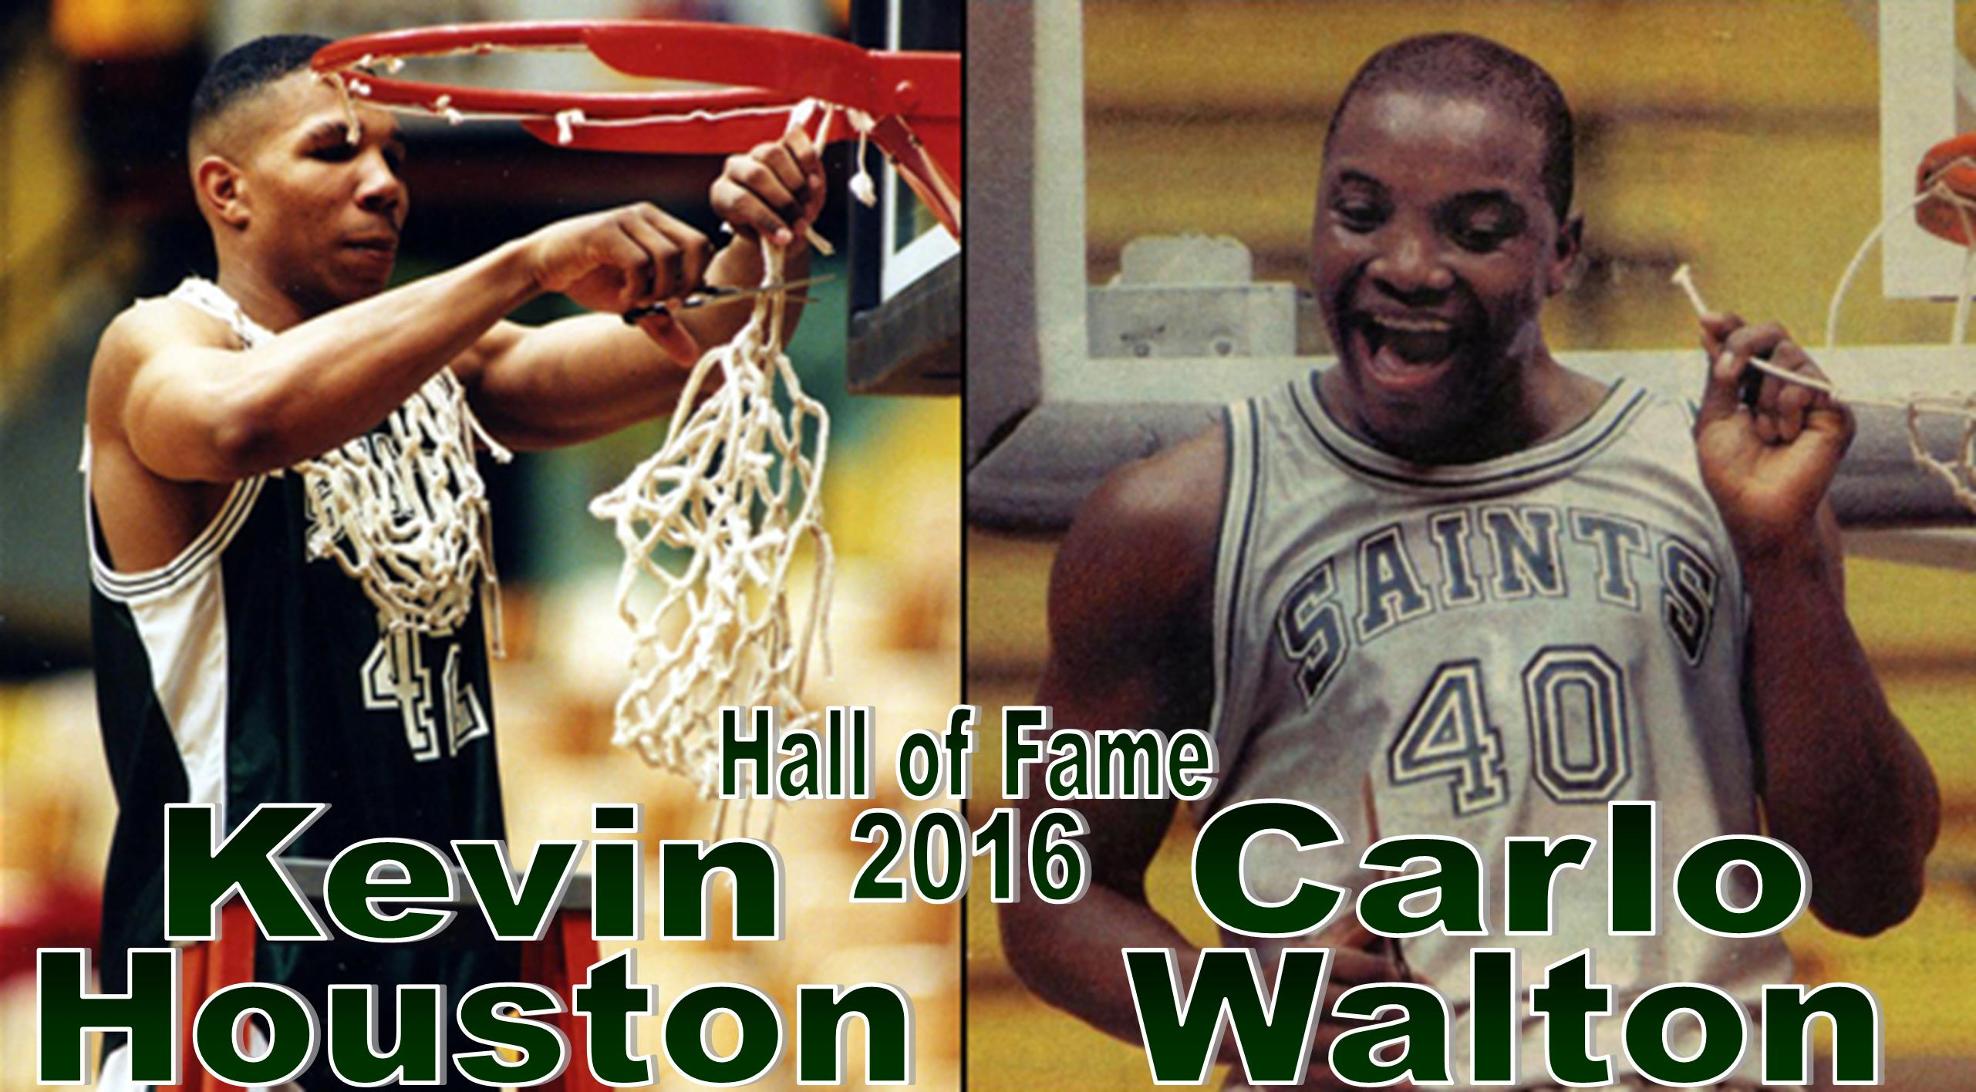 Saints Hall of Fame to Induct Houston/Walton in April